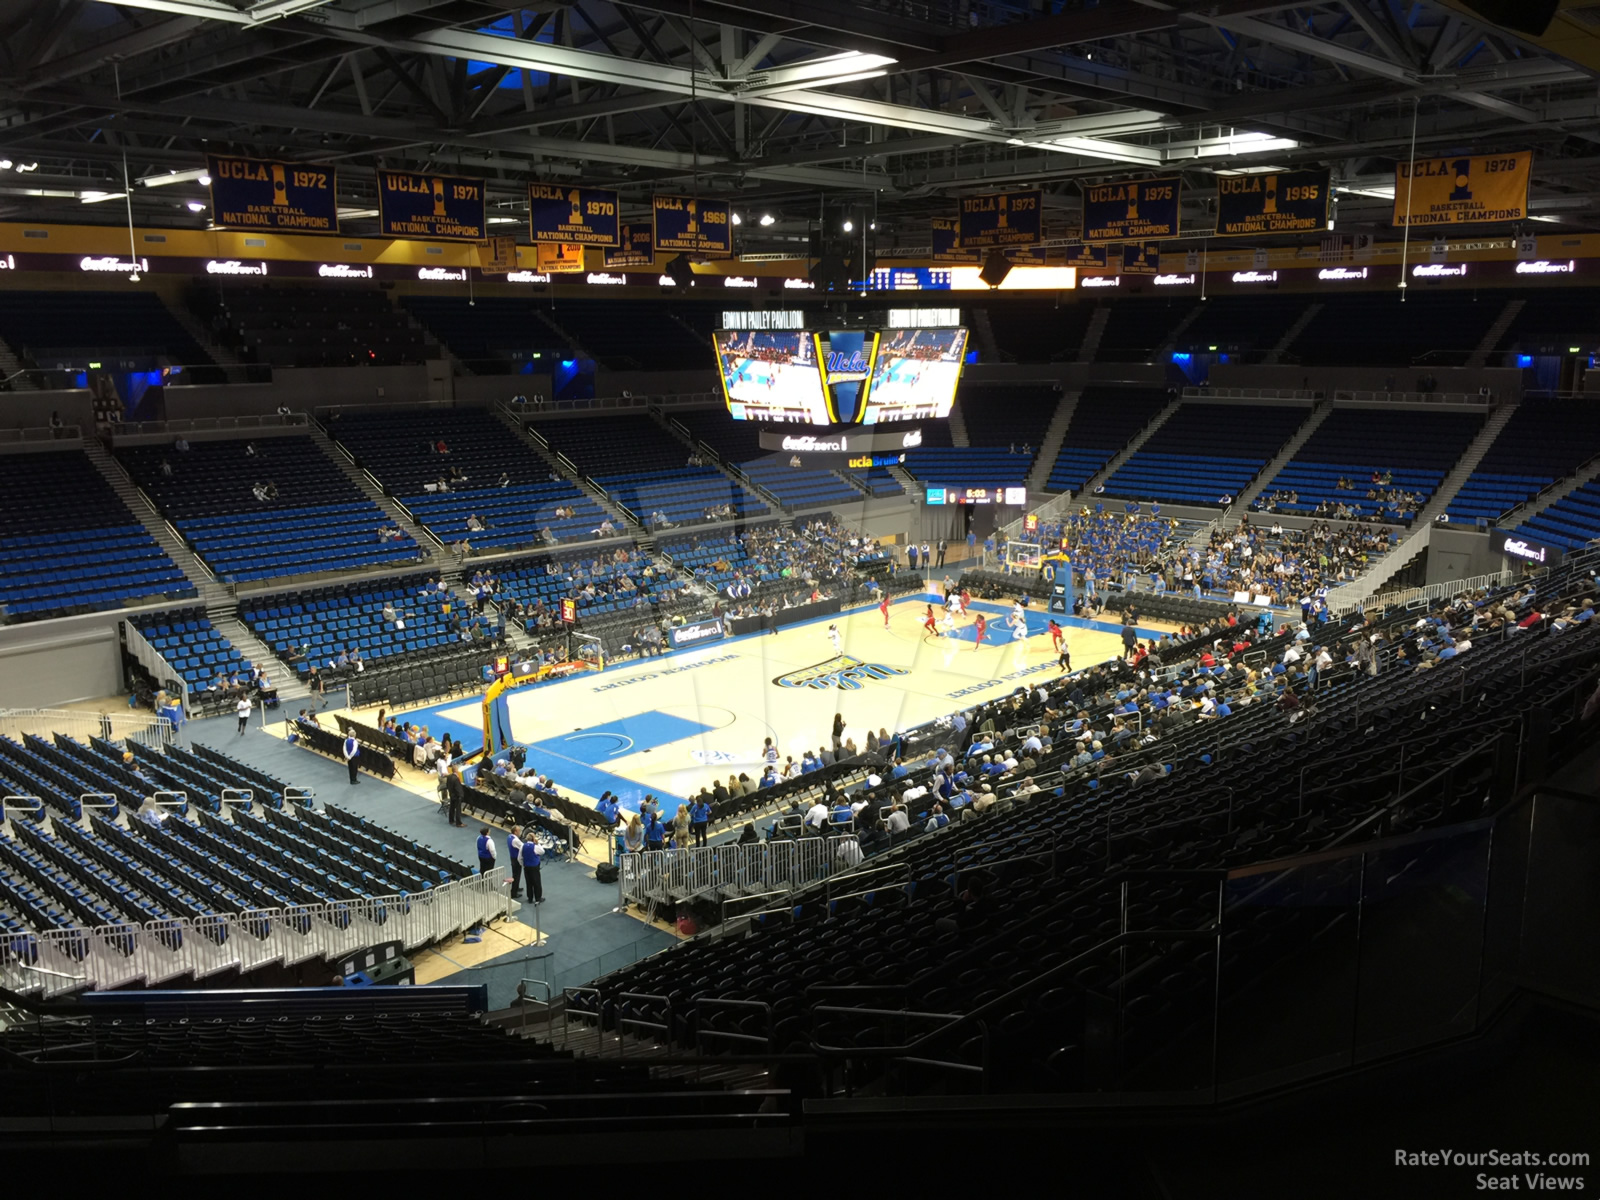 section 206a, row 6 seat view  - pauley pavilion